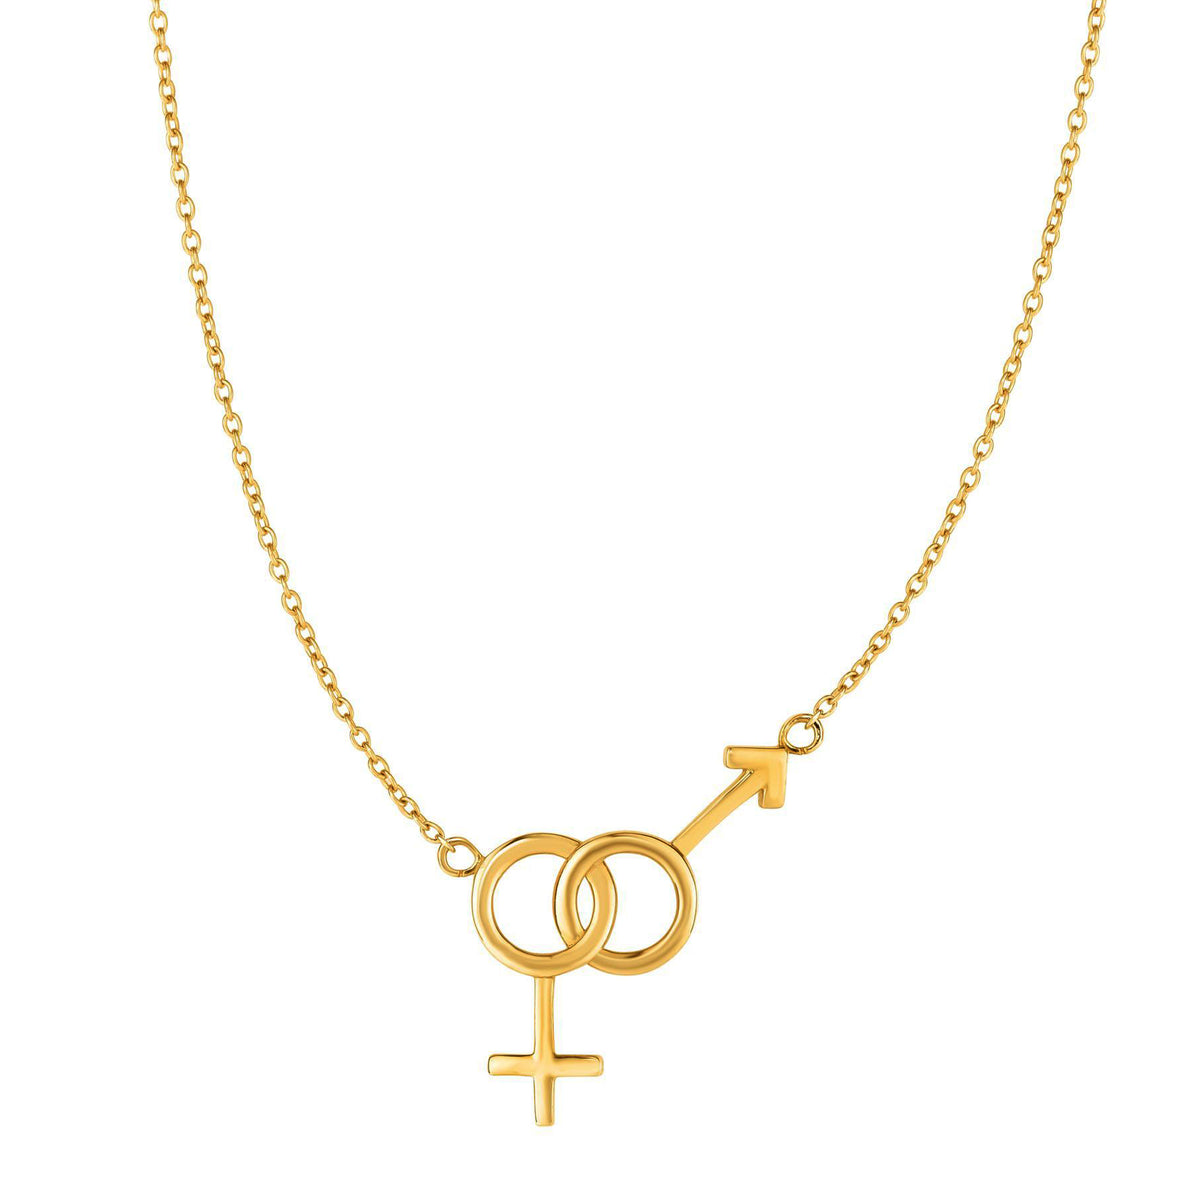 14k Yellow Gold Gender Symbol Chain Necklace, 18"